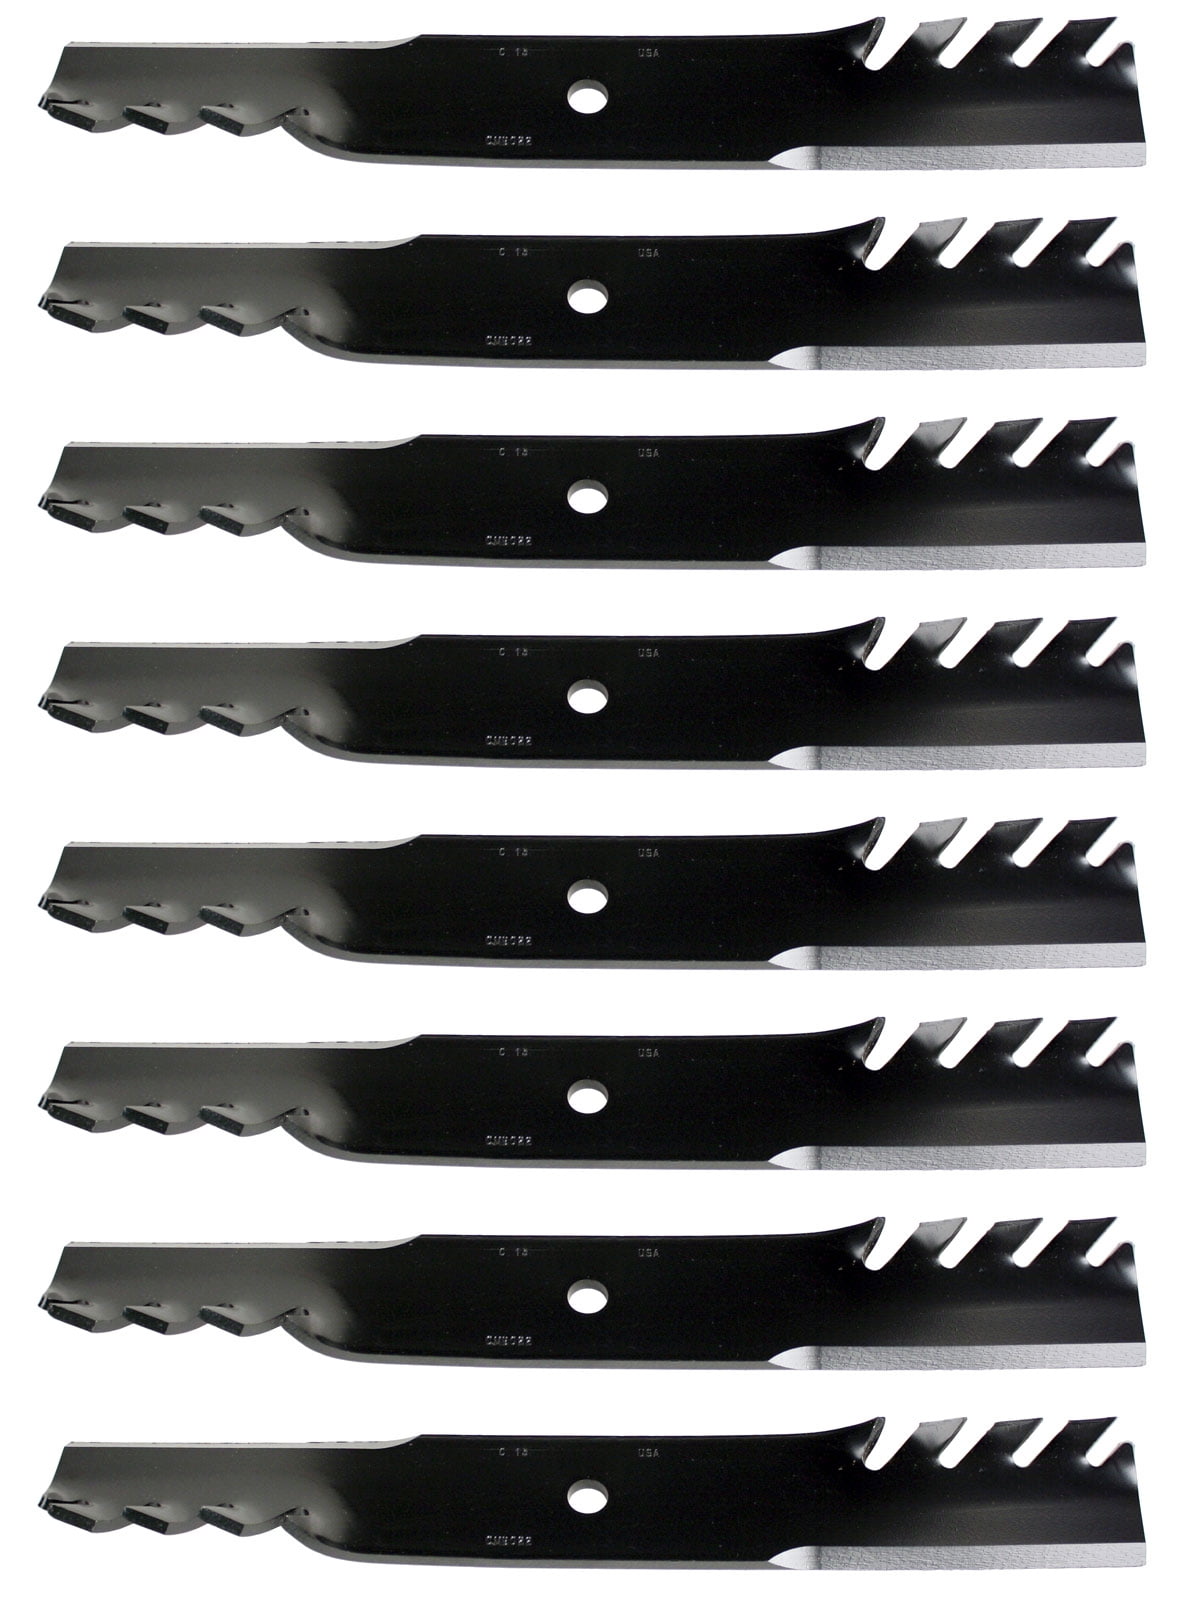 SET OF 12 SCAG GATOR MULCH BLADES FOR 52" CUT REPLACES OEM 482878 481707 48185